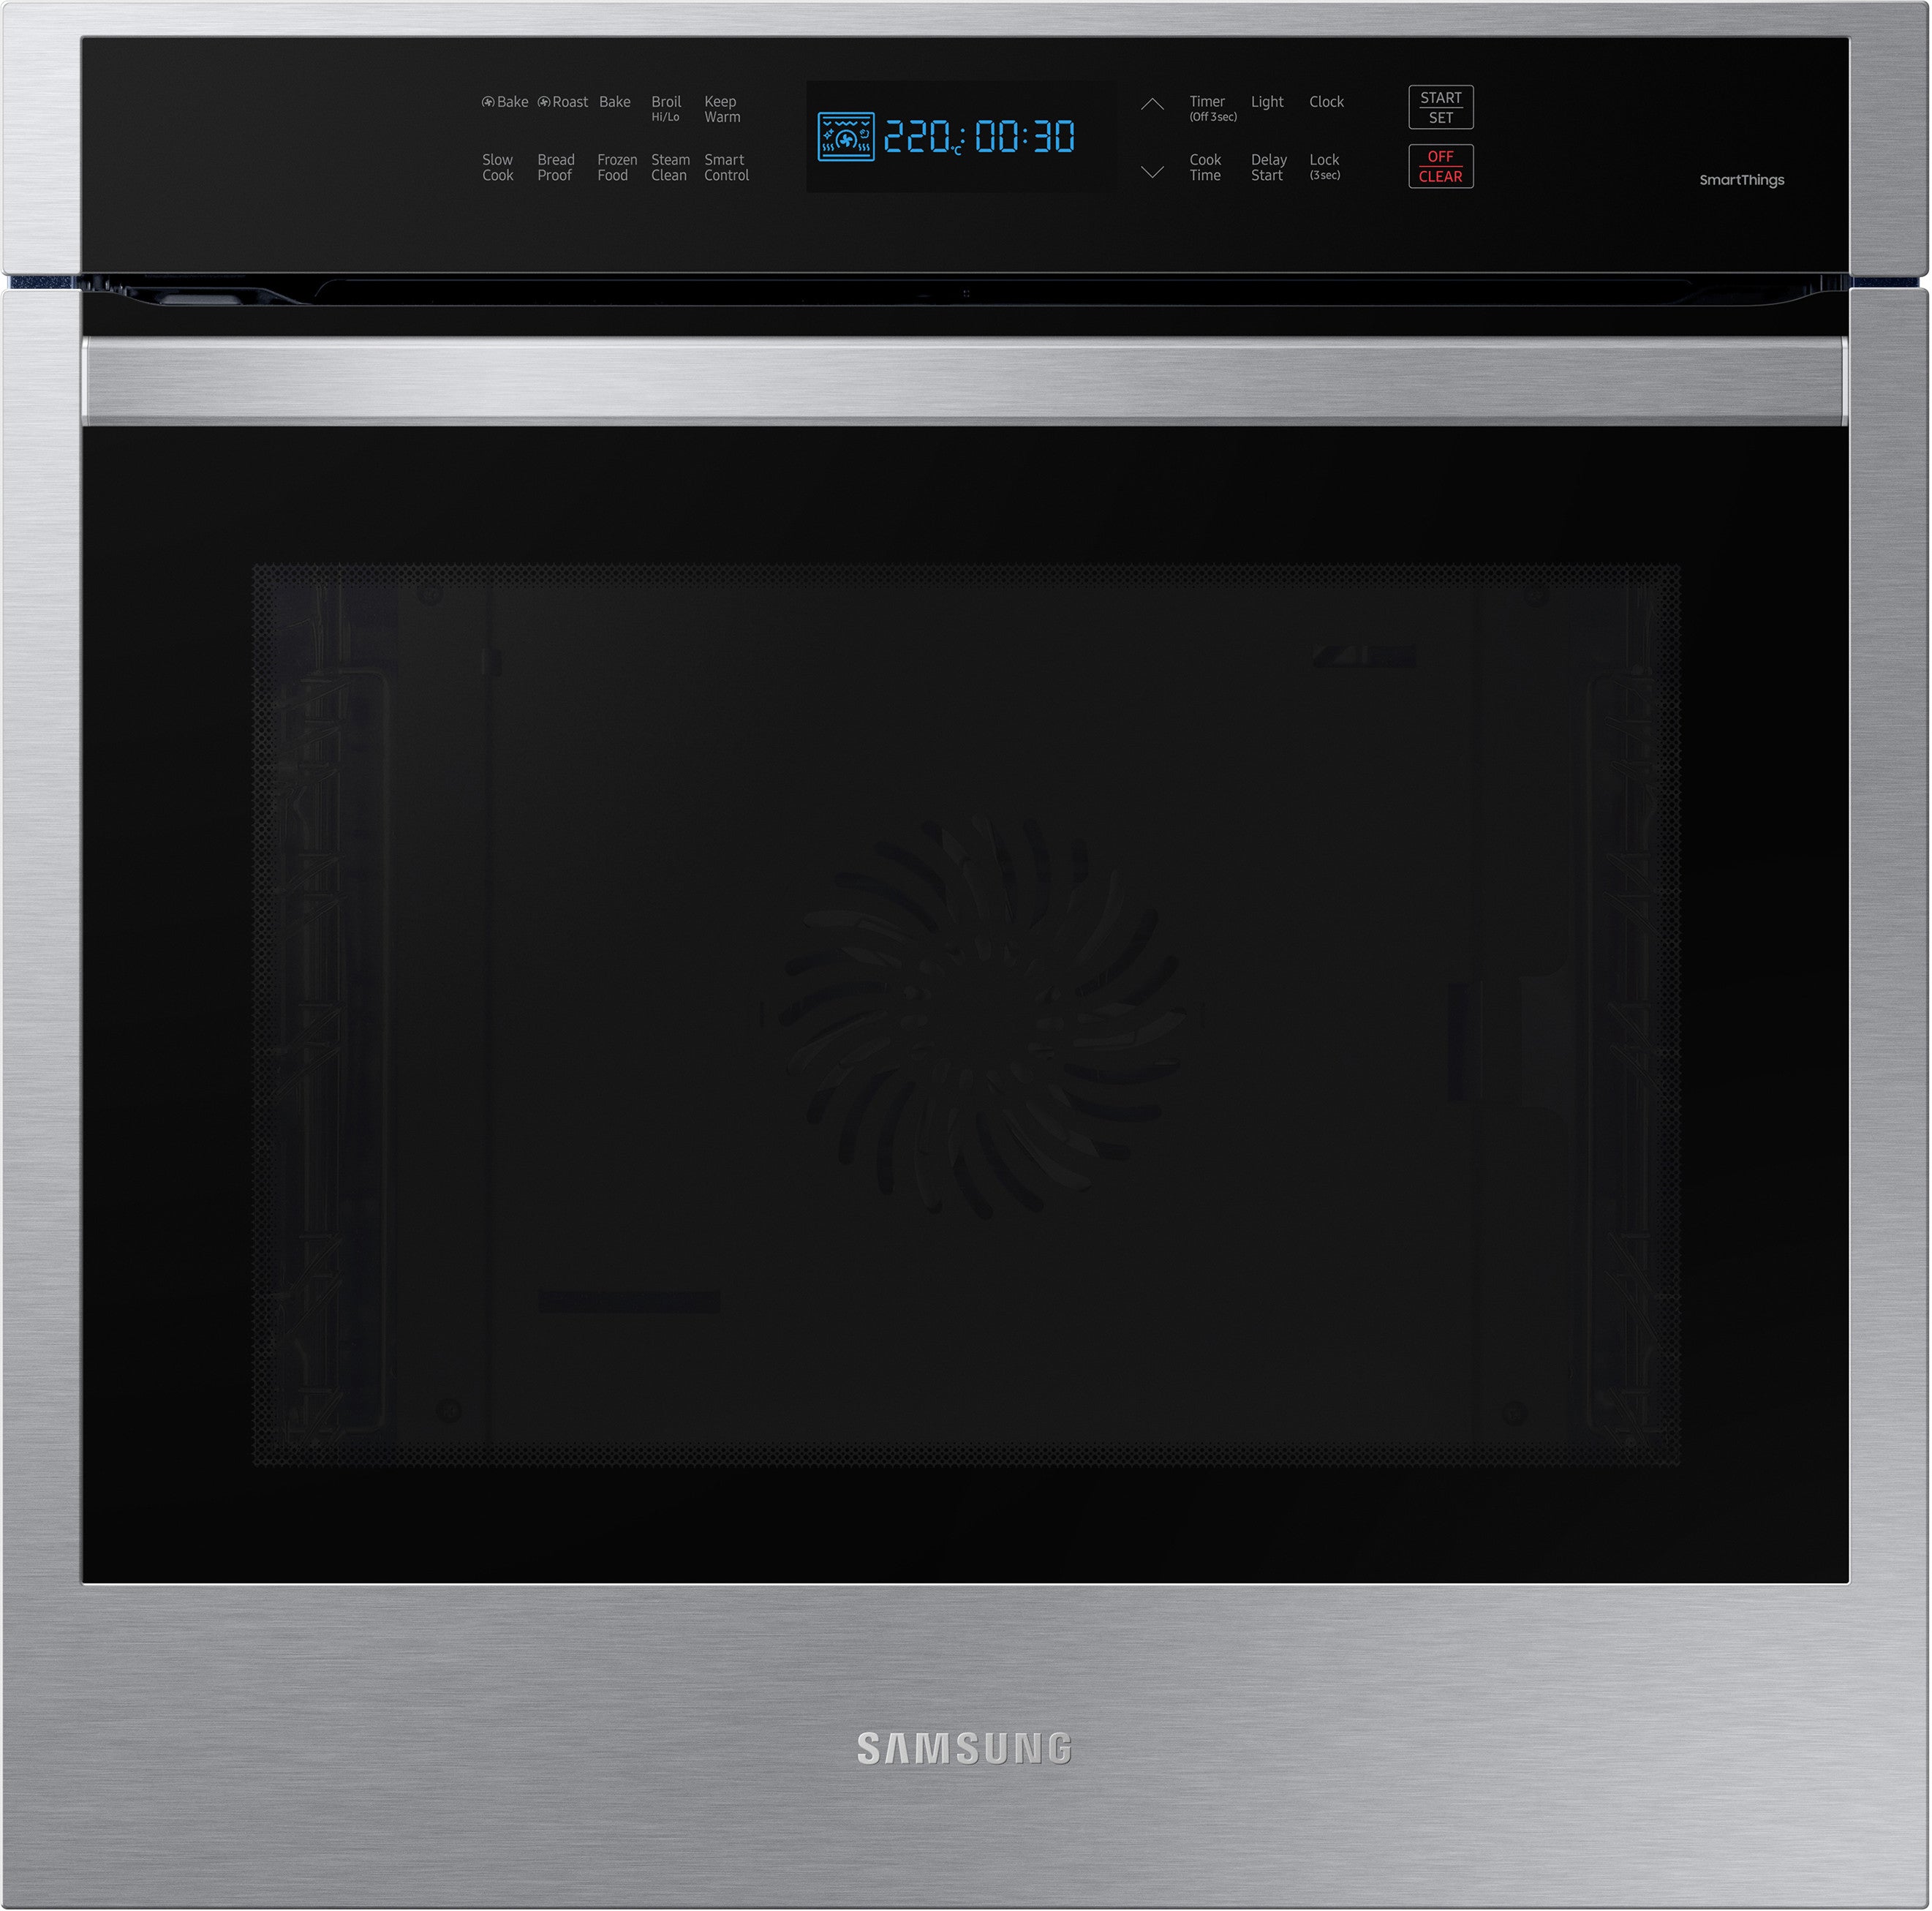 NV31T4551SS - WALL OVENS - Samsung - Single Oven - Stainless Steel - Open Box - WALL OVENS - BonPrix Électroménagers